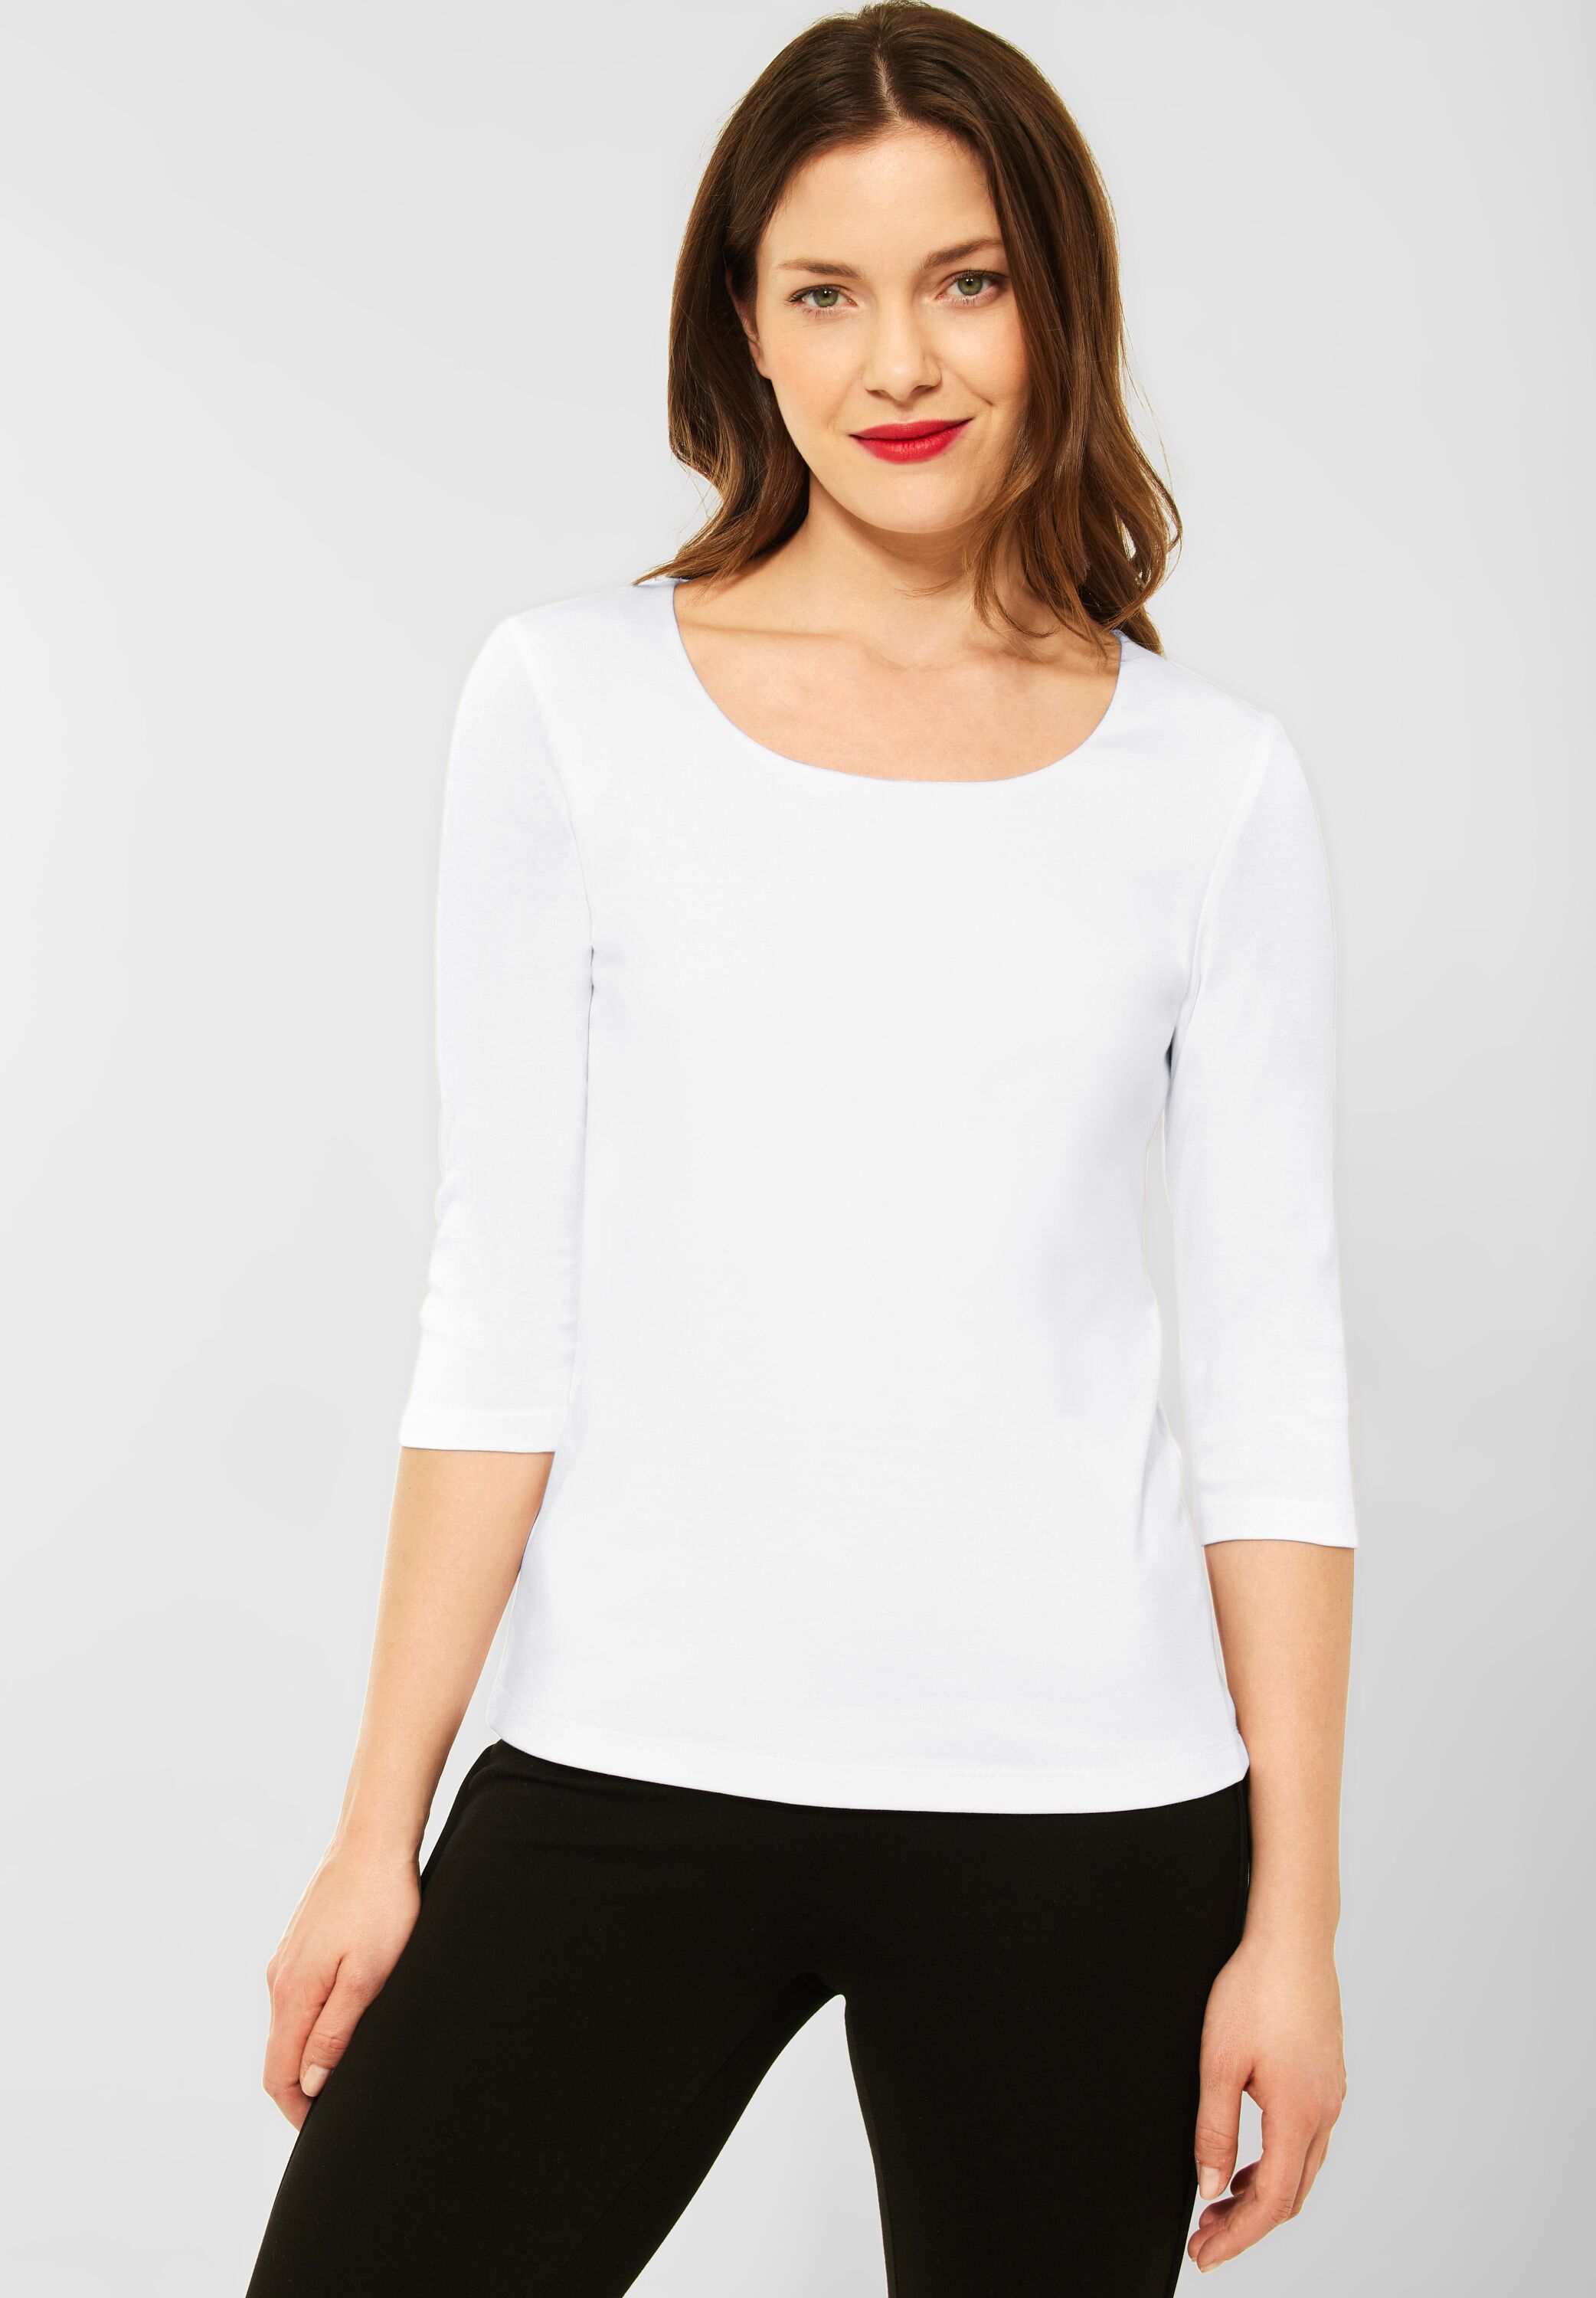 Mode Pania White Shirt CONCEPT A317588-10000 - in Street One